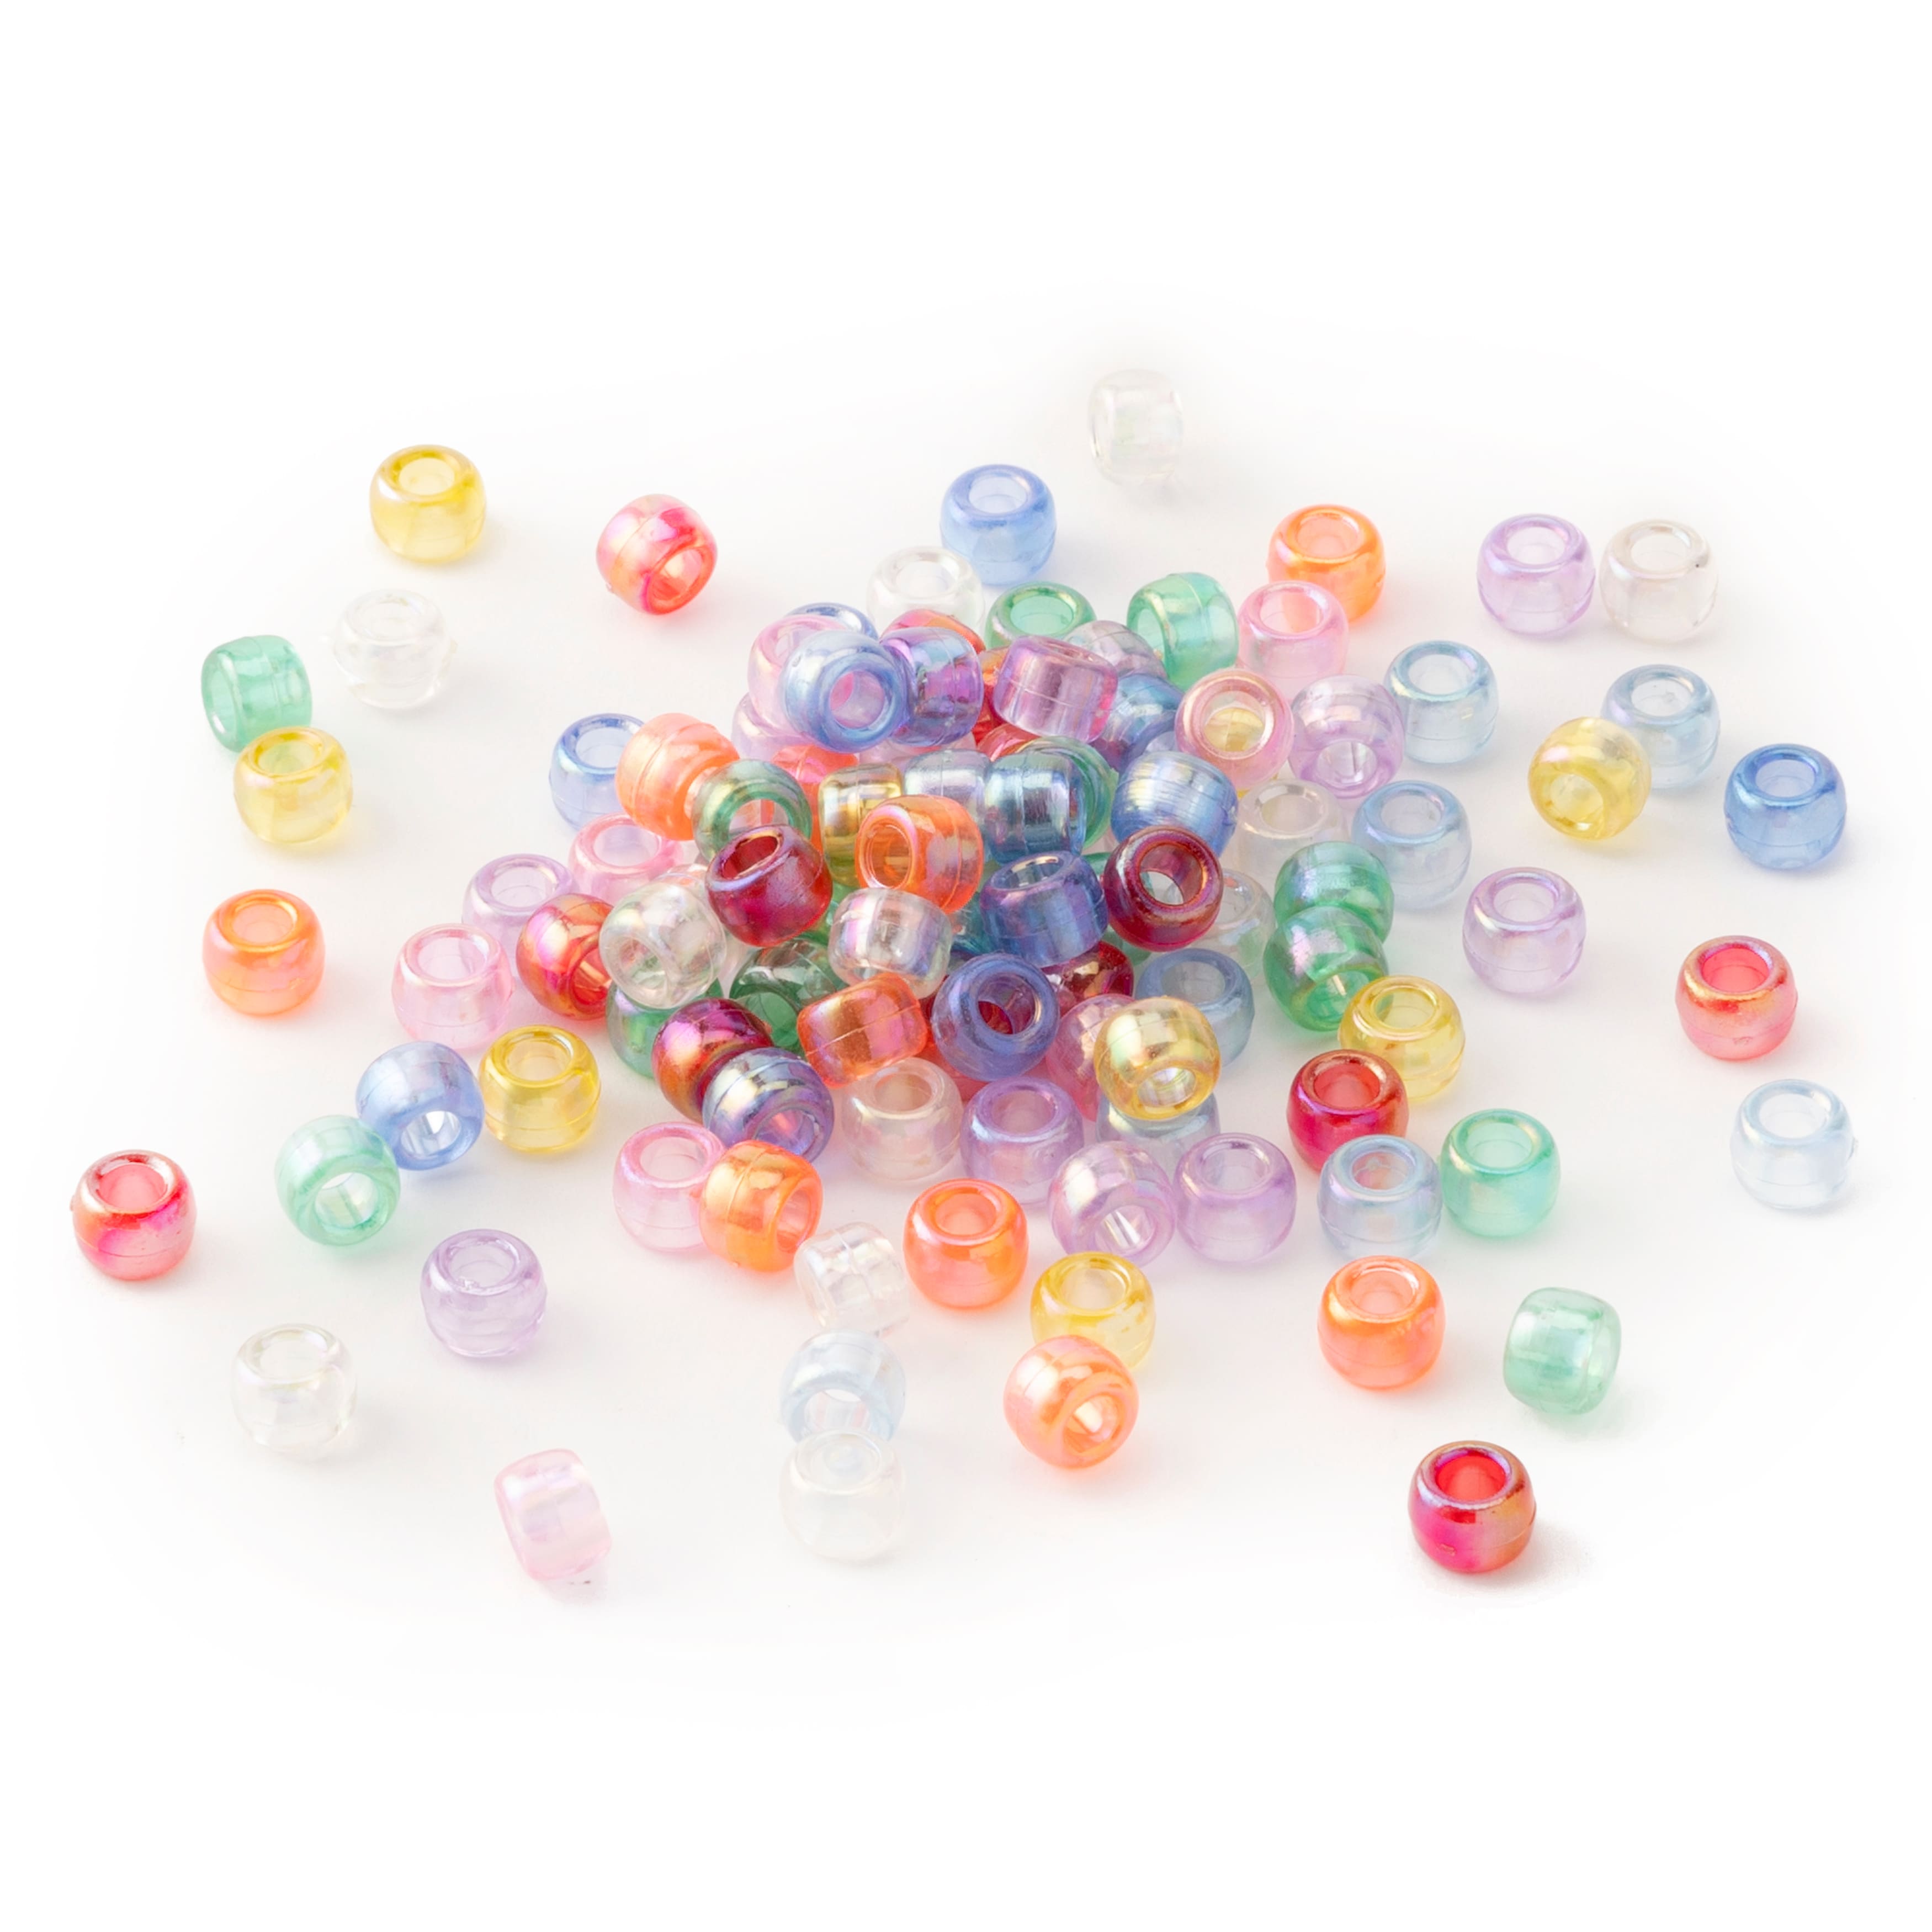 Crystal Clear Pony Beads by Creatology™, 6mm x 9mm, Michaels